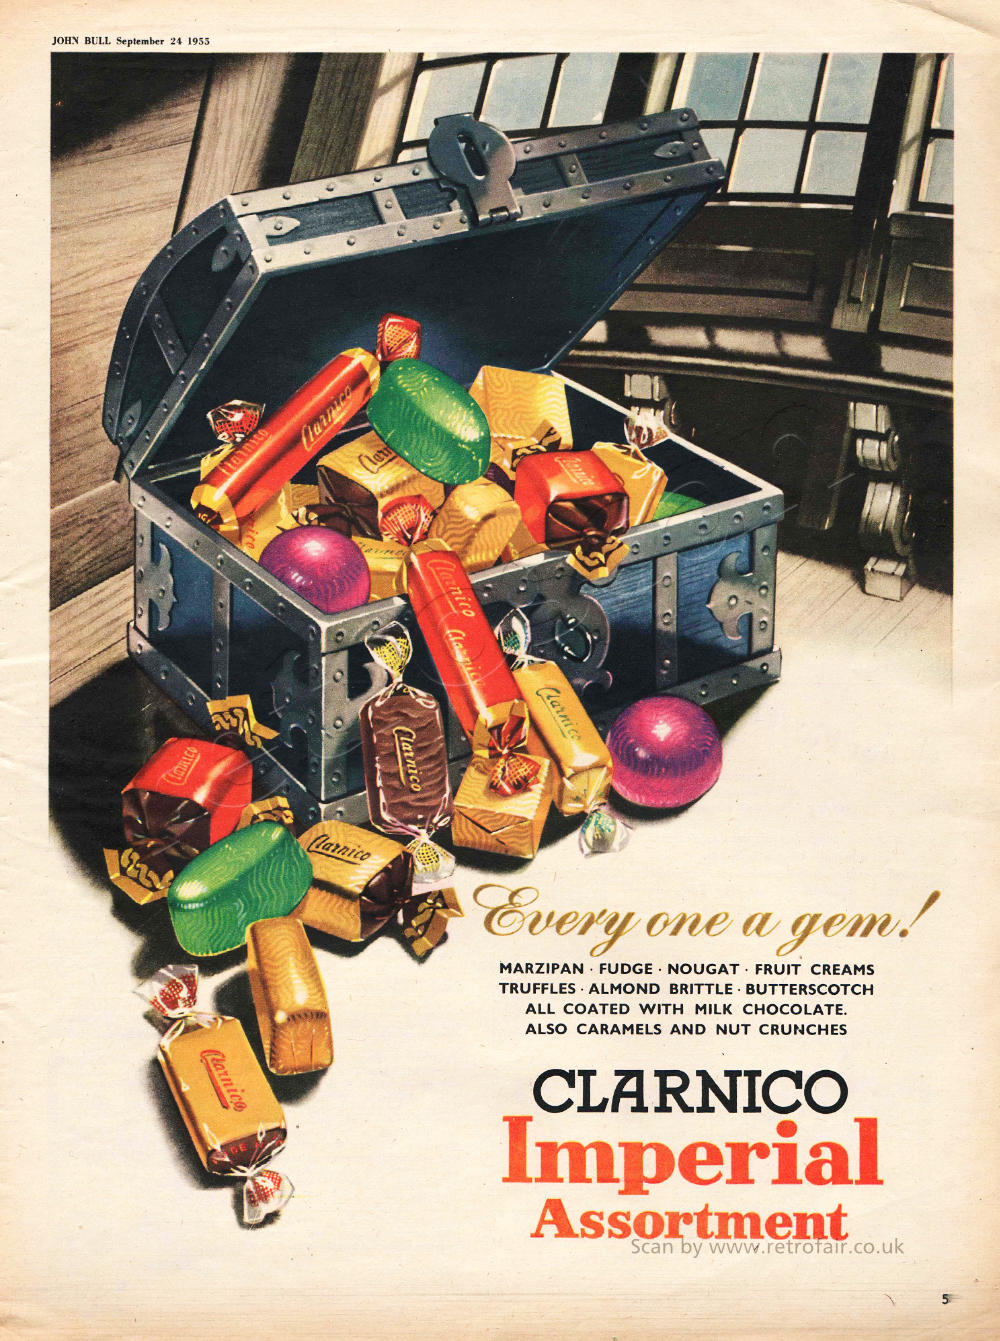 1955 Clarnico Imperial Assortment vintage ad